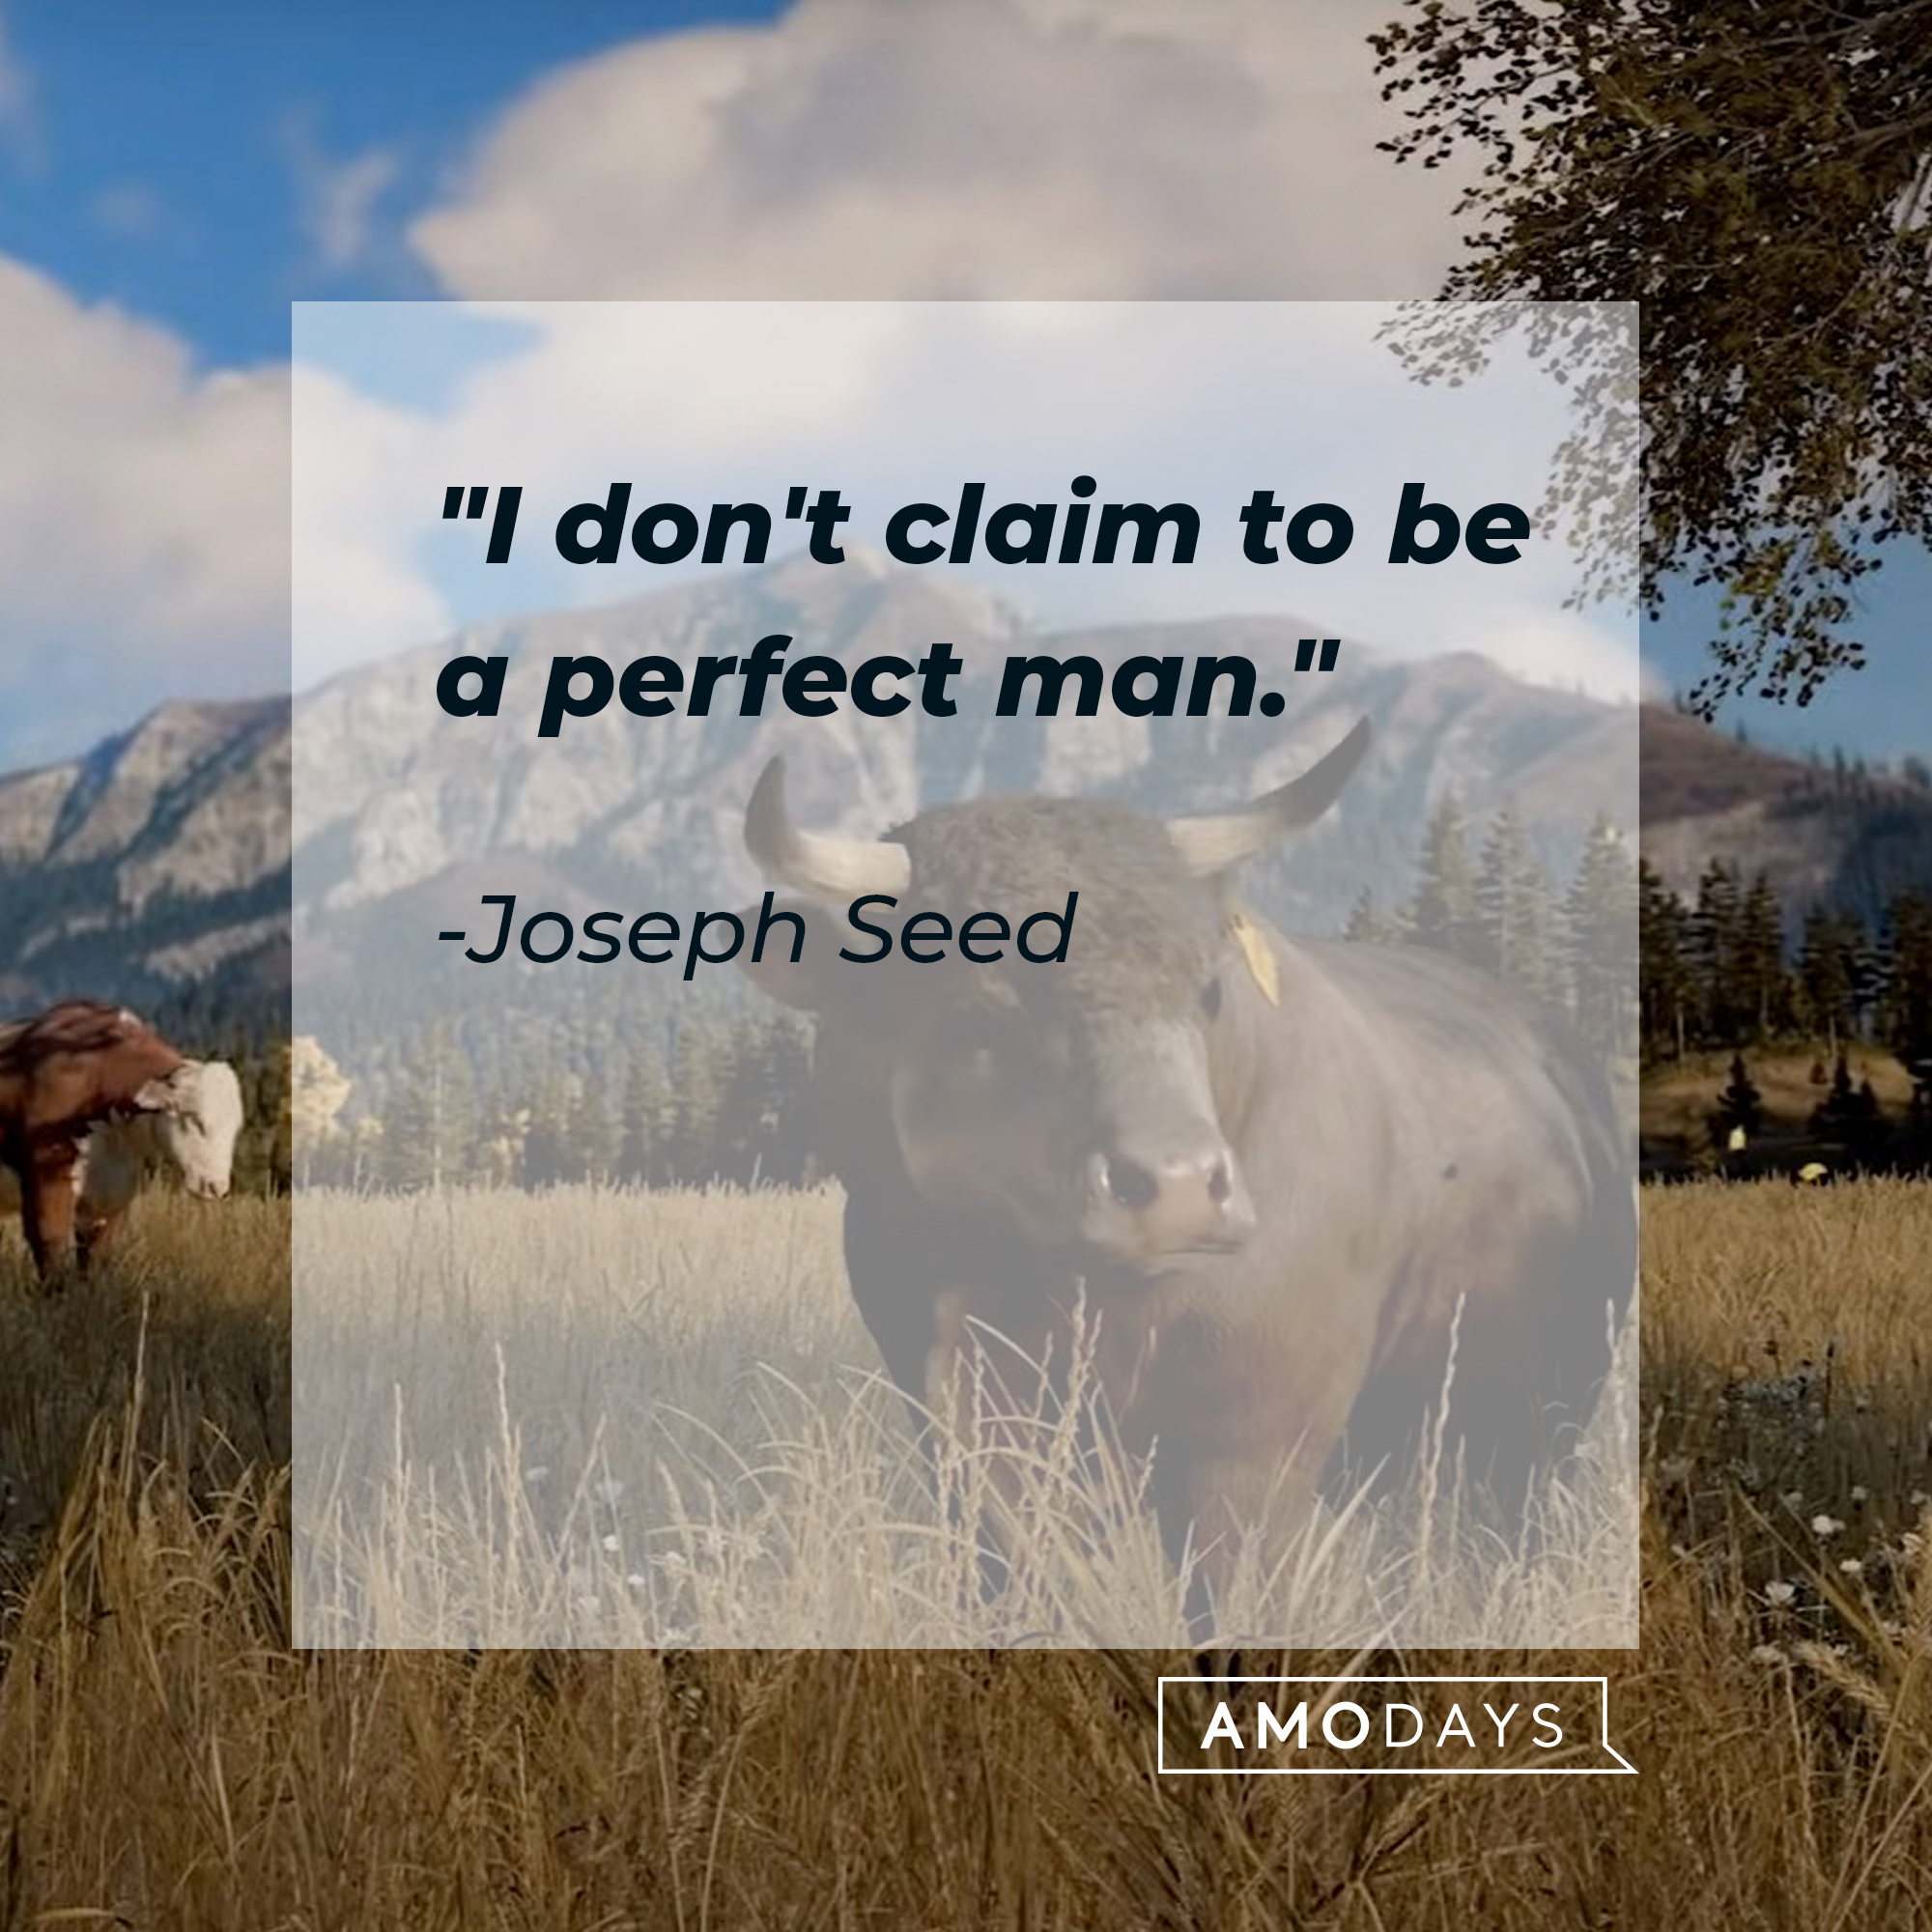 An image of "Far Cry 5" with Joseph Seed's quote: "I don't claim to be a perfect man." | Source: youtube.com/Ubisoft North America